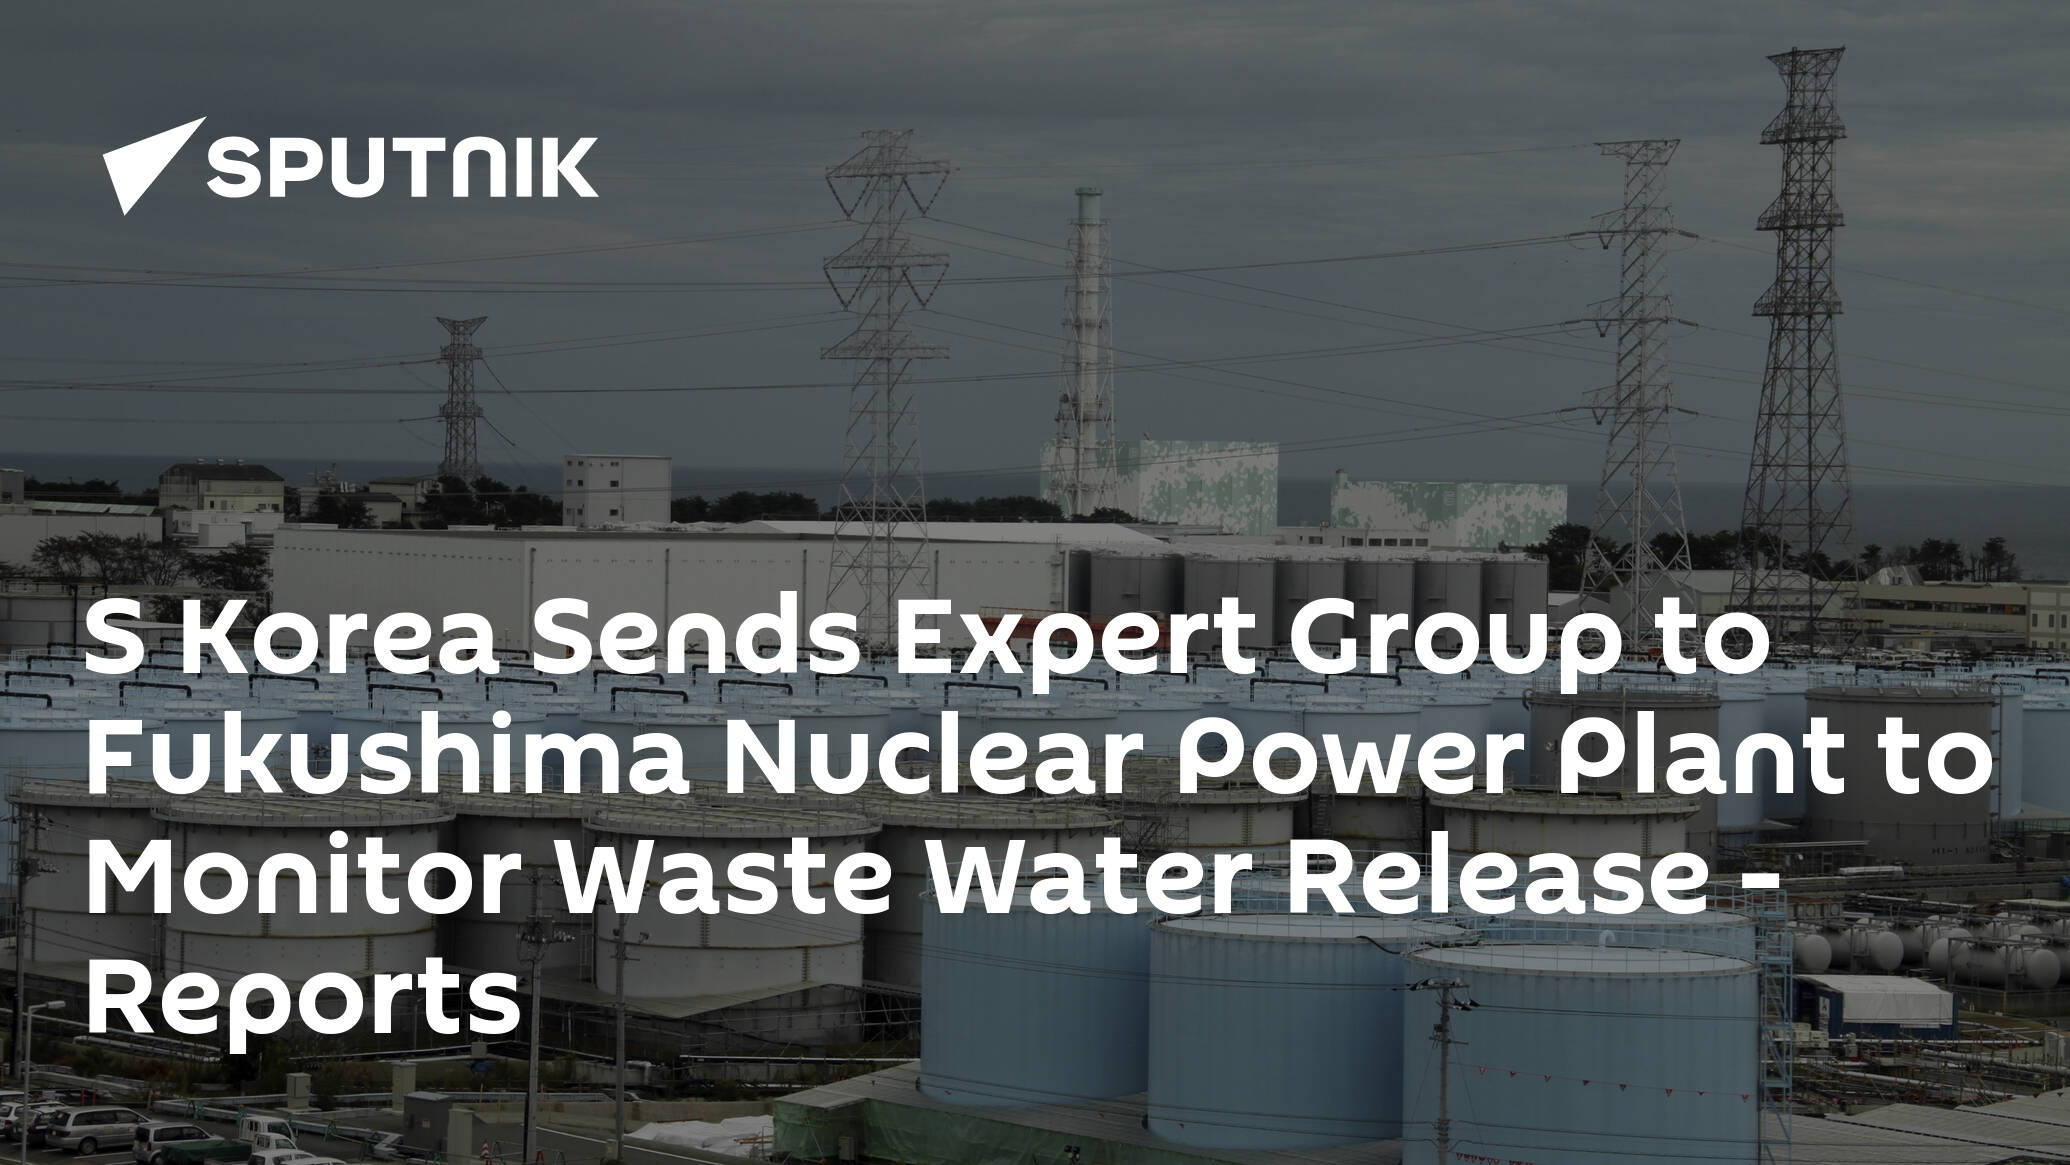 S Korea Sends Expert Group to Fukushima Nuclear Power Plant to Monitor Waste Water Release – Reports